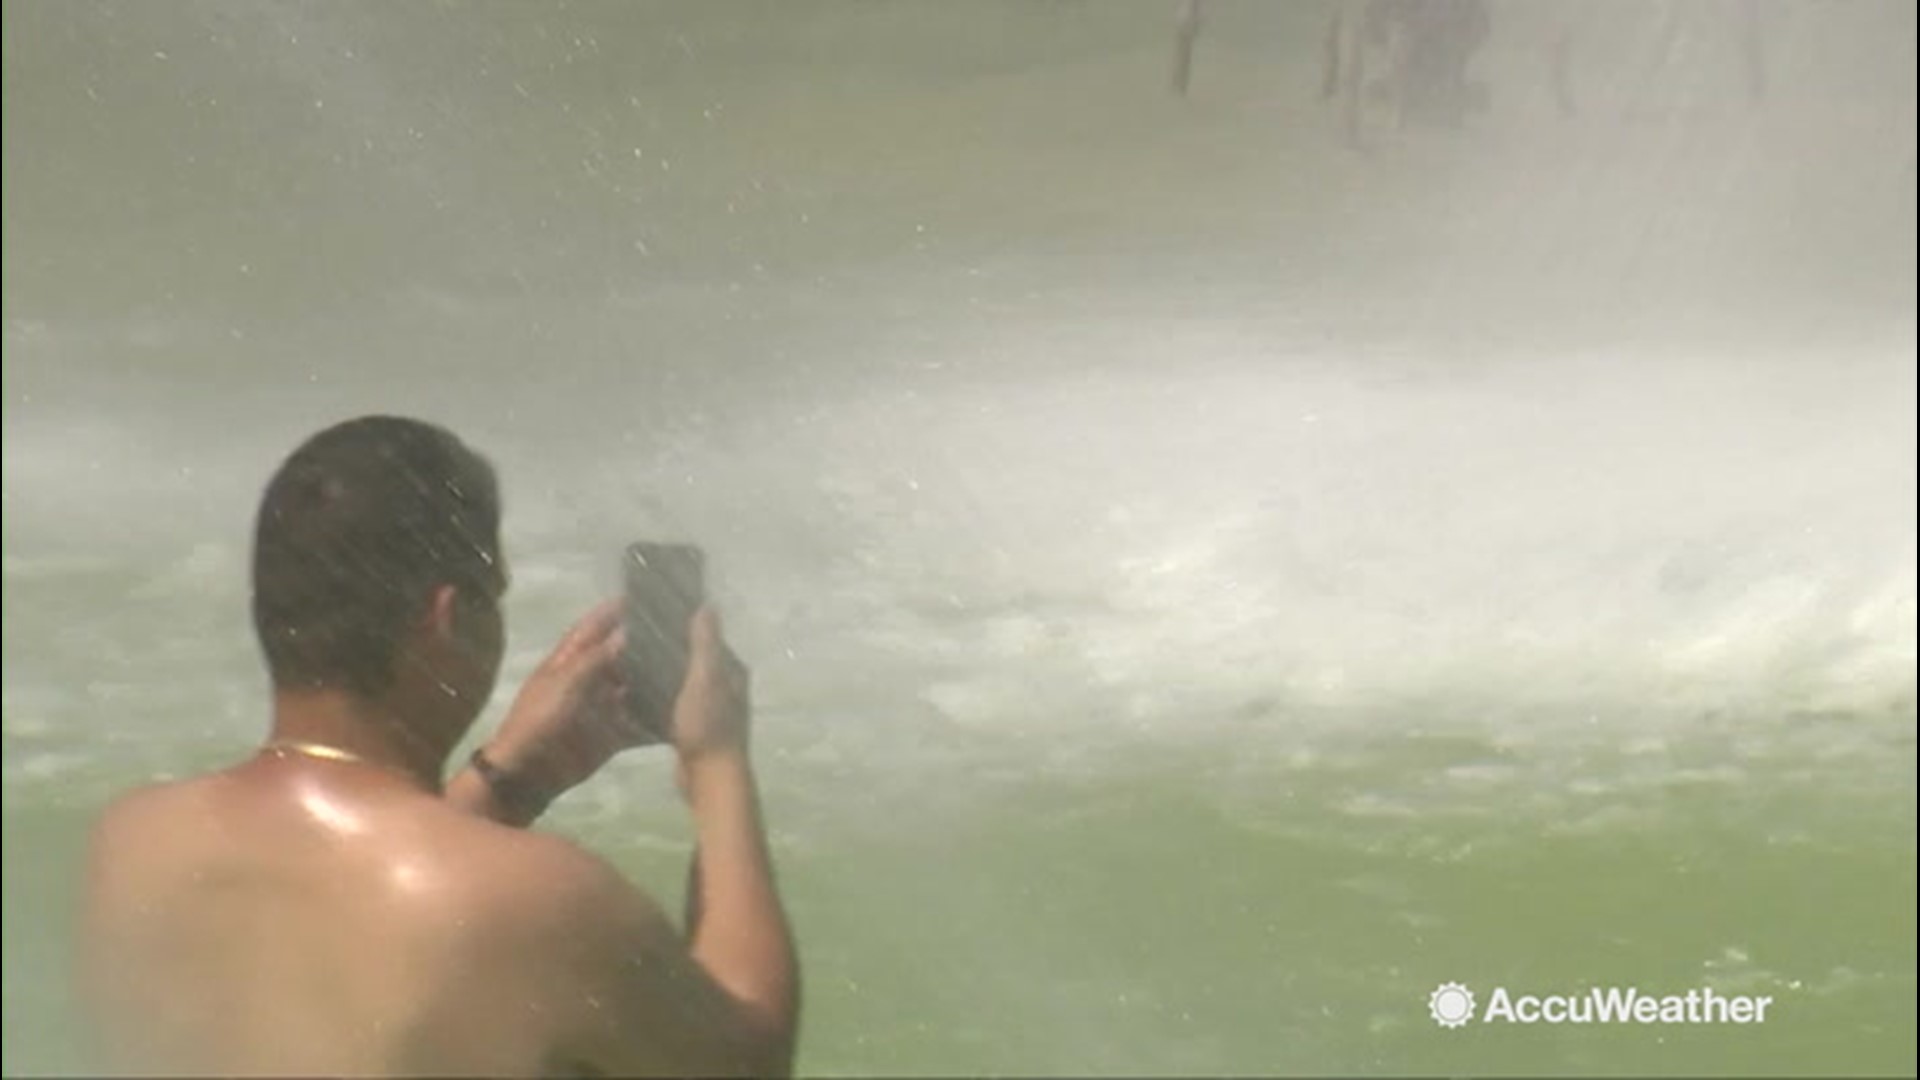 Tourist visiting Paris are doing their best to beat the Paris heatwave which which could bring record-breaking temperatures this week. Tourists took to the fountains in front of the Eiffel Tower to cool off on Tuesday, July 23.